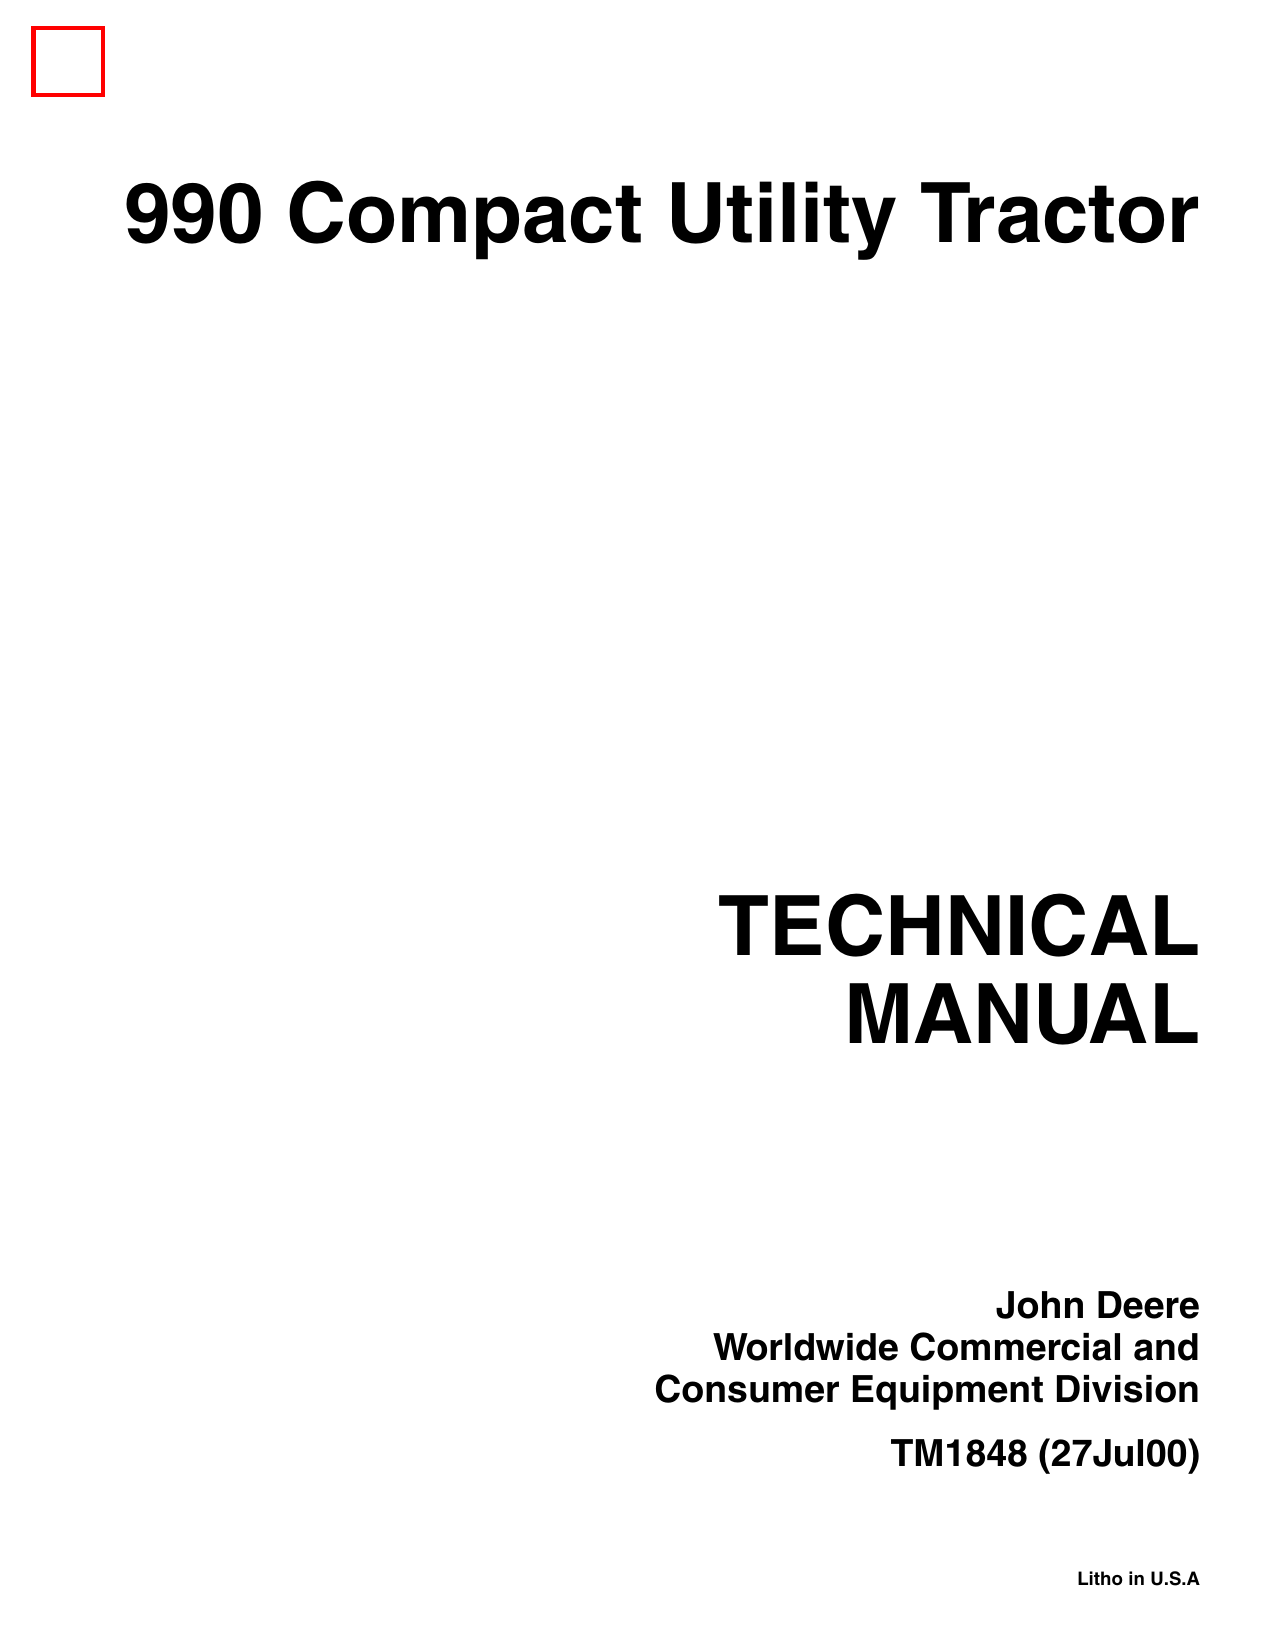 John Deere 990 compact utility tractor technical manual Preview image 1